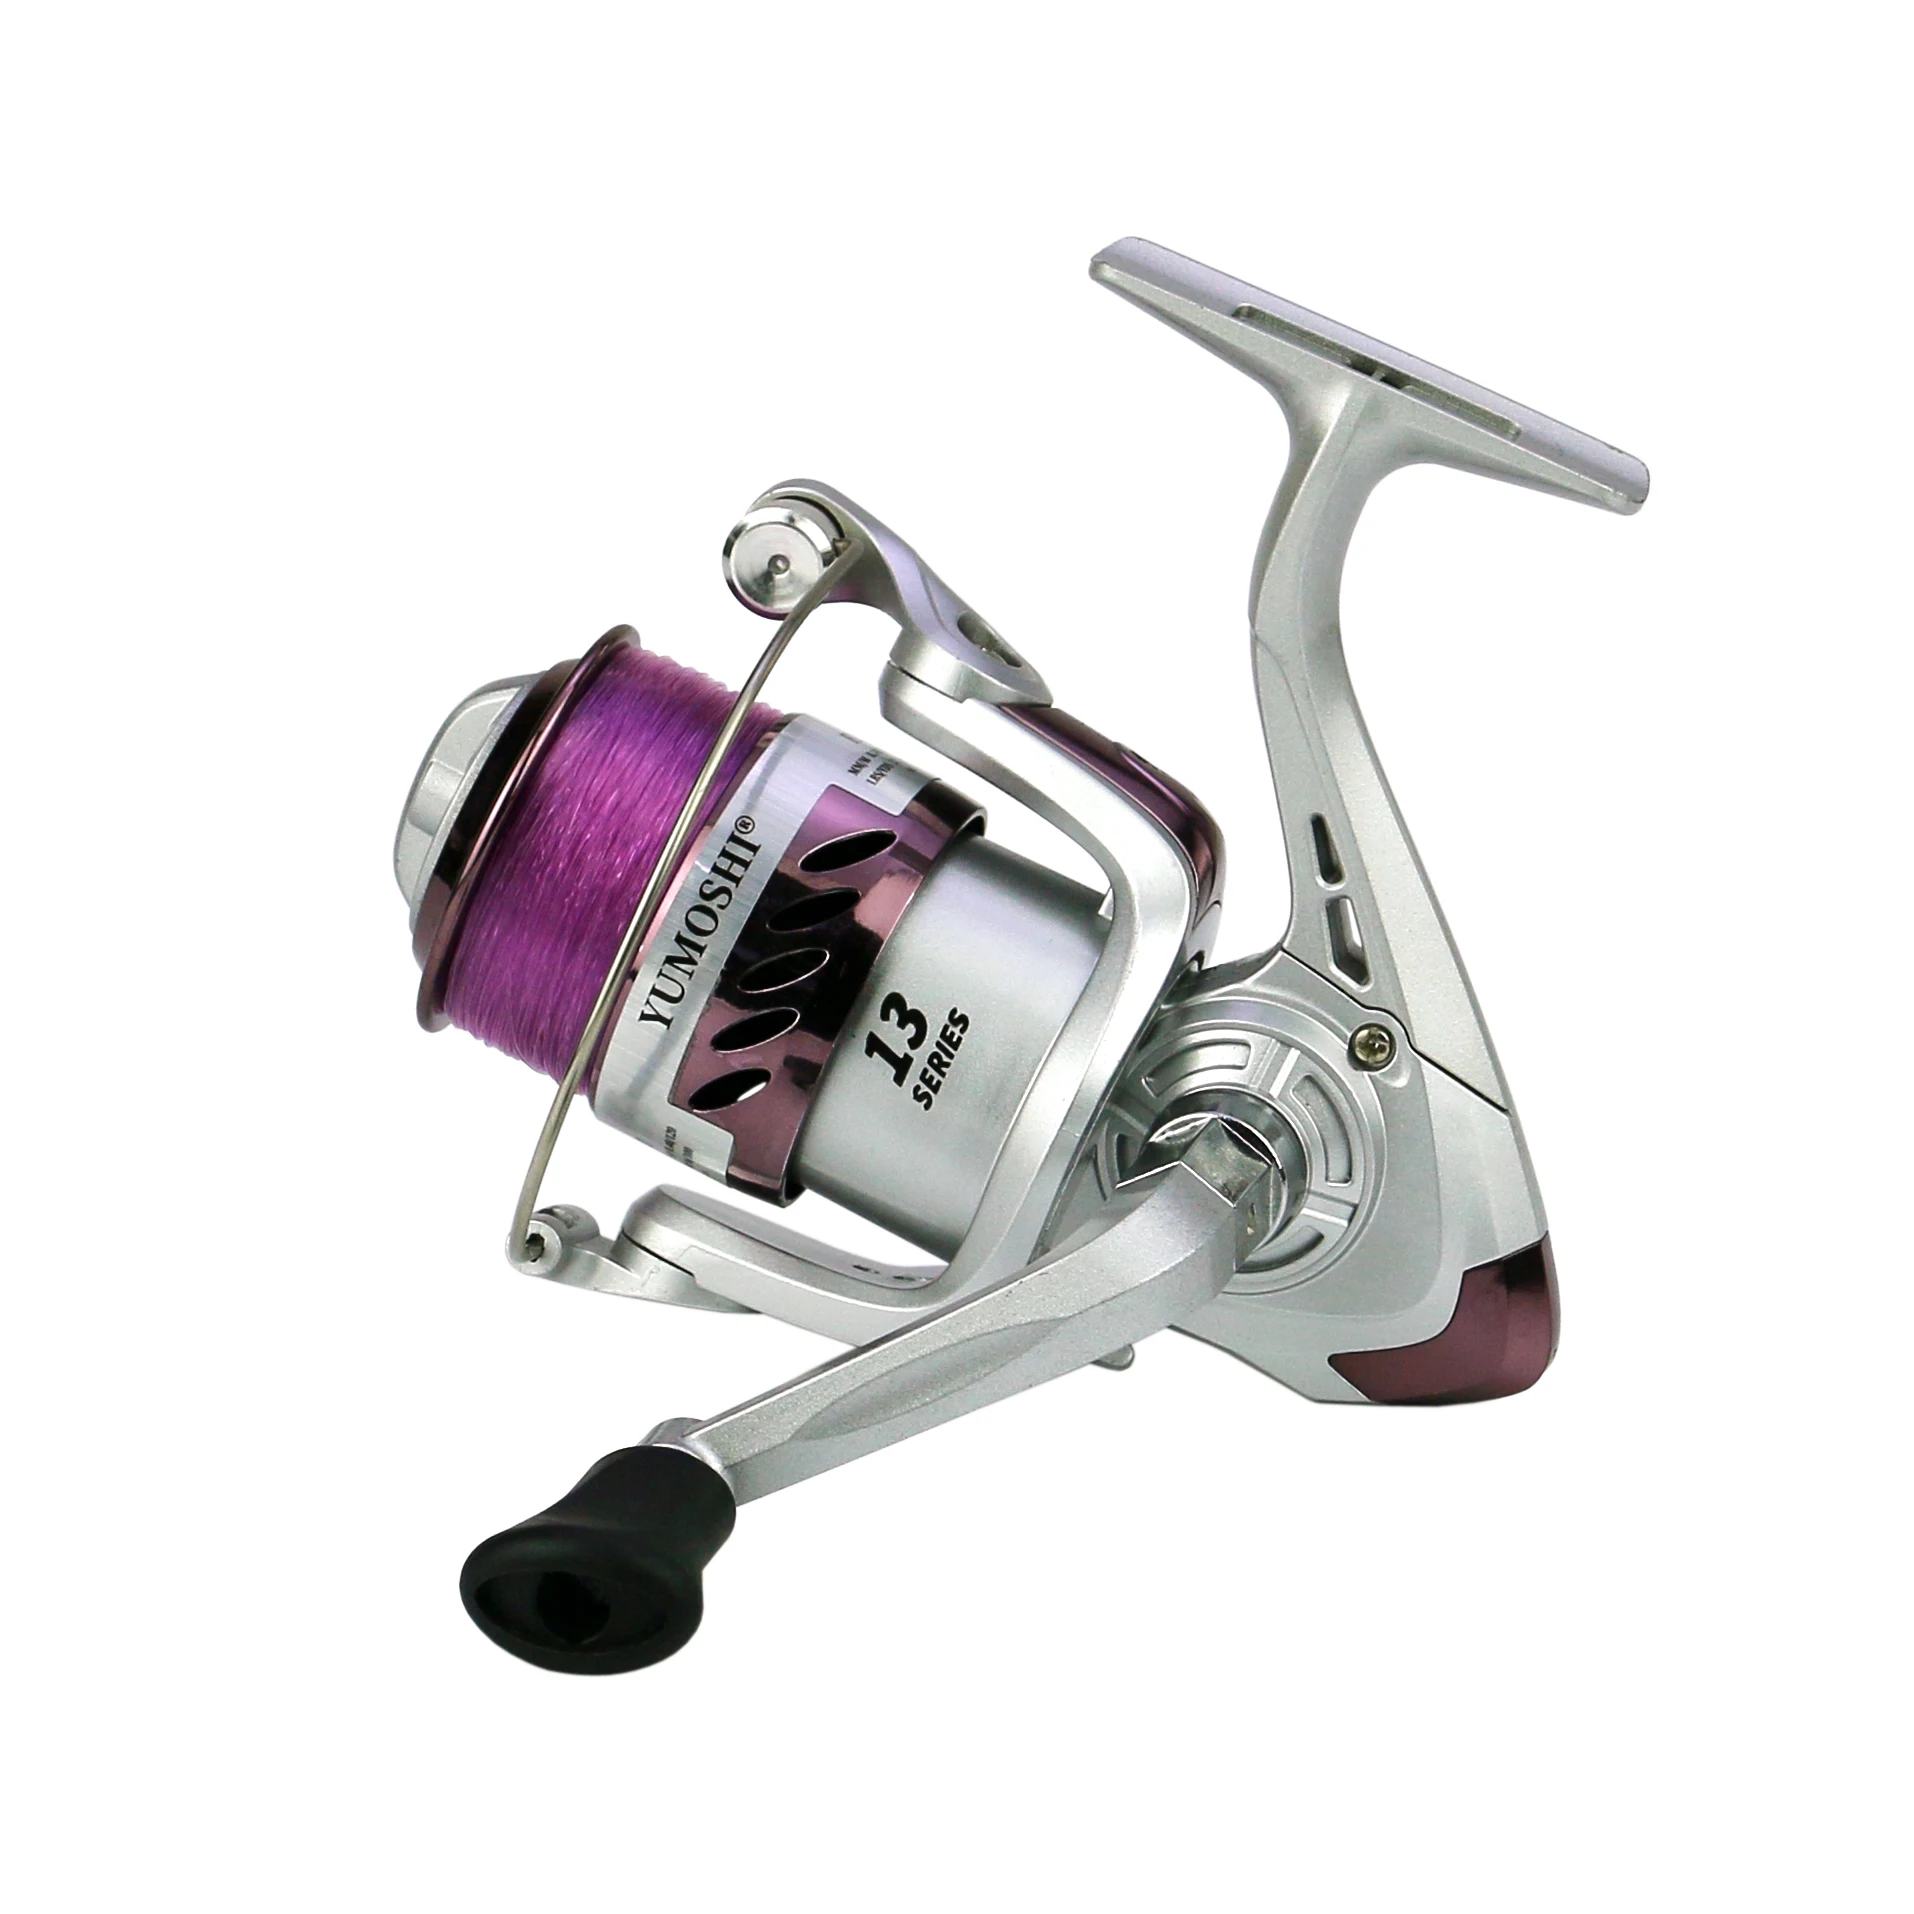 Hot Factory Price 2000-7000 Series 5.2:1 Competitive Spinning Fishing Reel